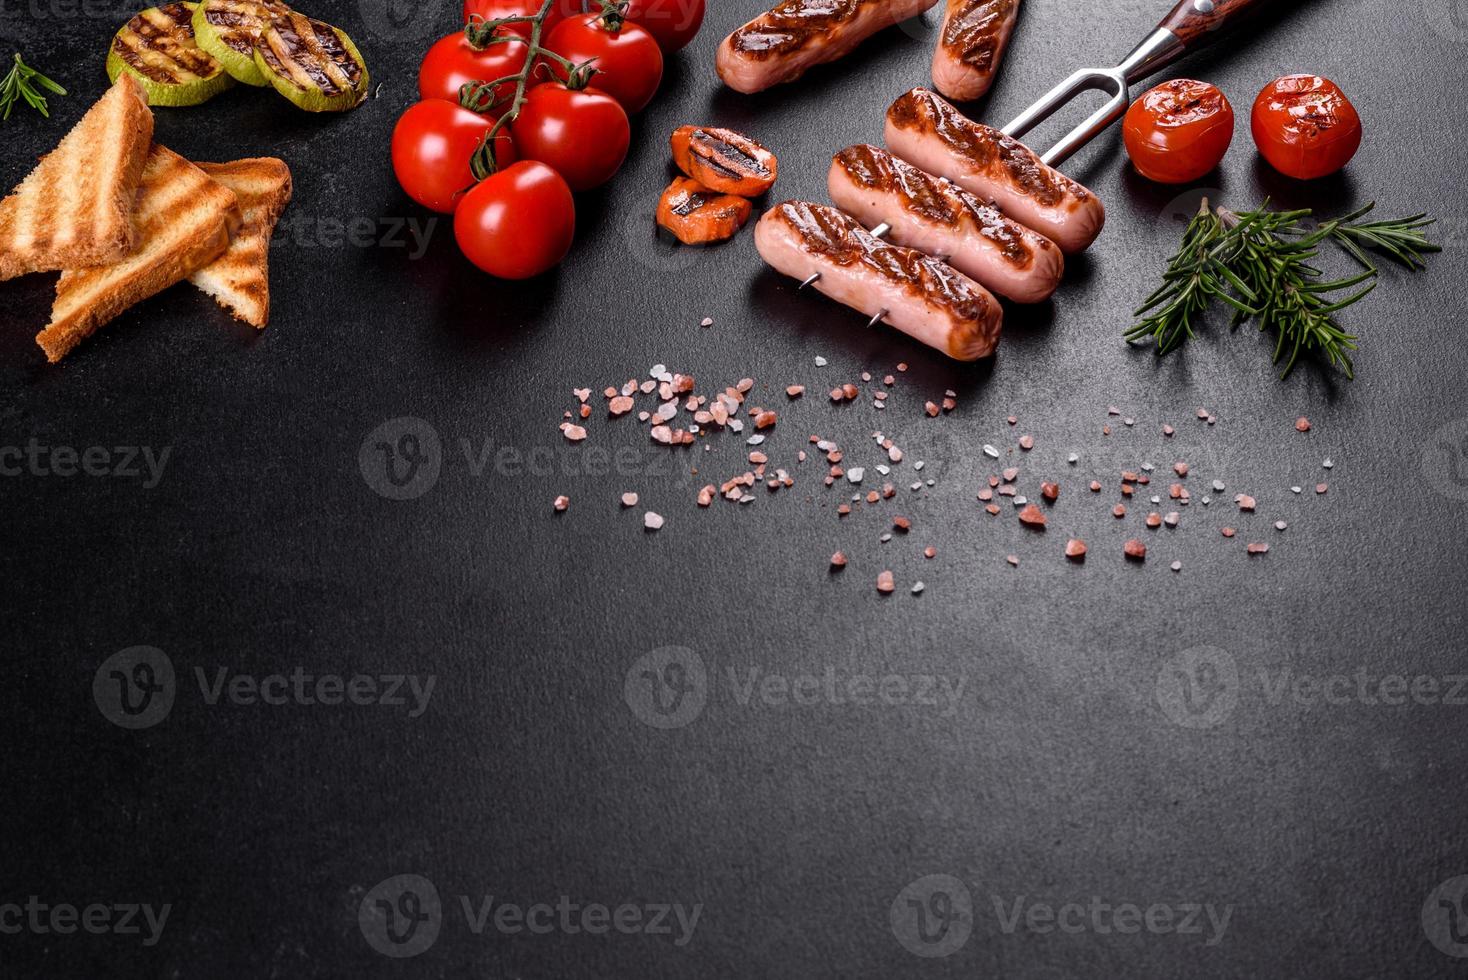 Tasty, fresh sausages grilled with vegetables spices and herbs photo